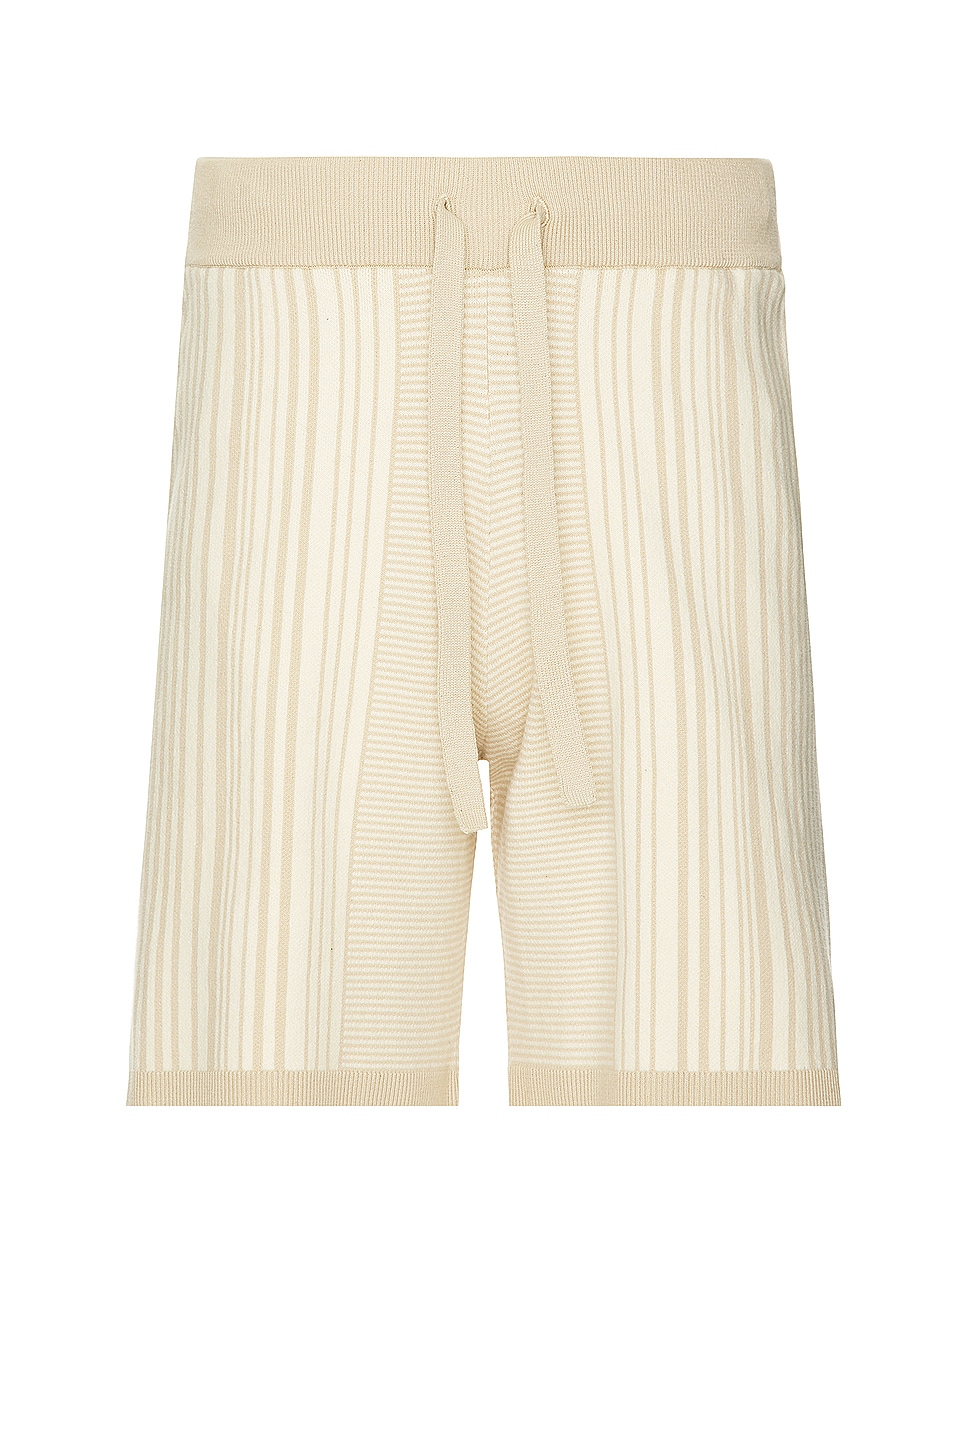 Fully Knitted Pattern Short in Cream